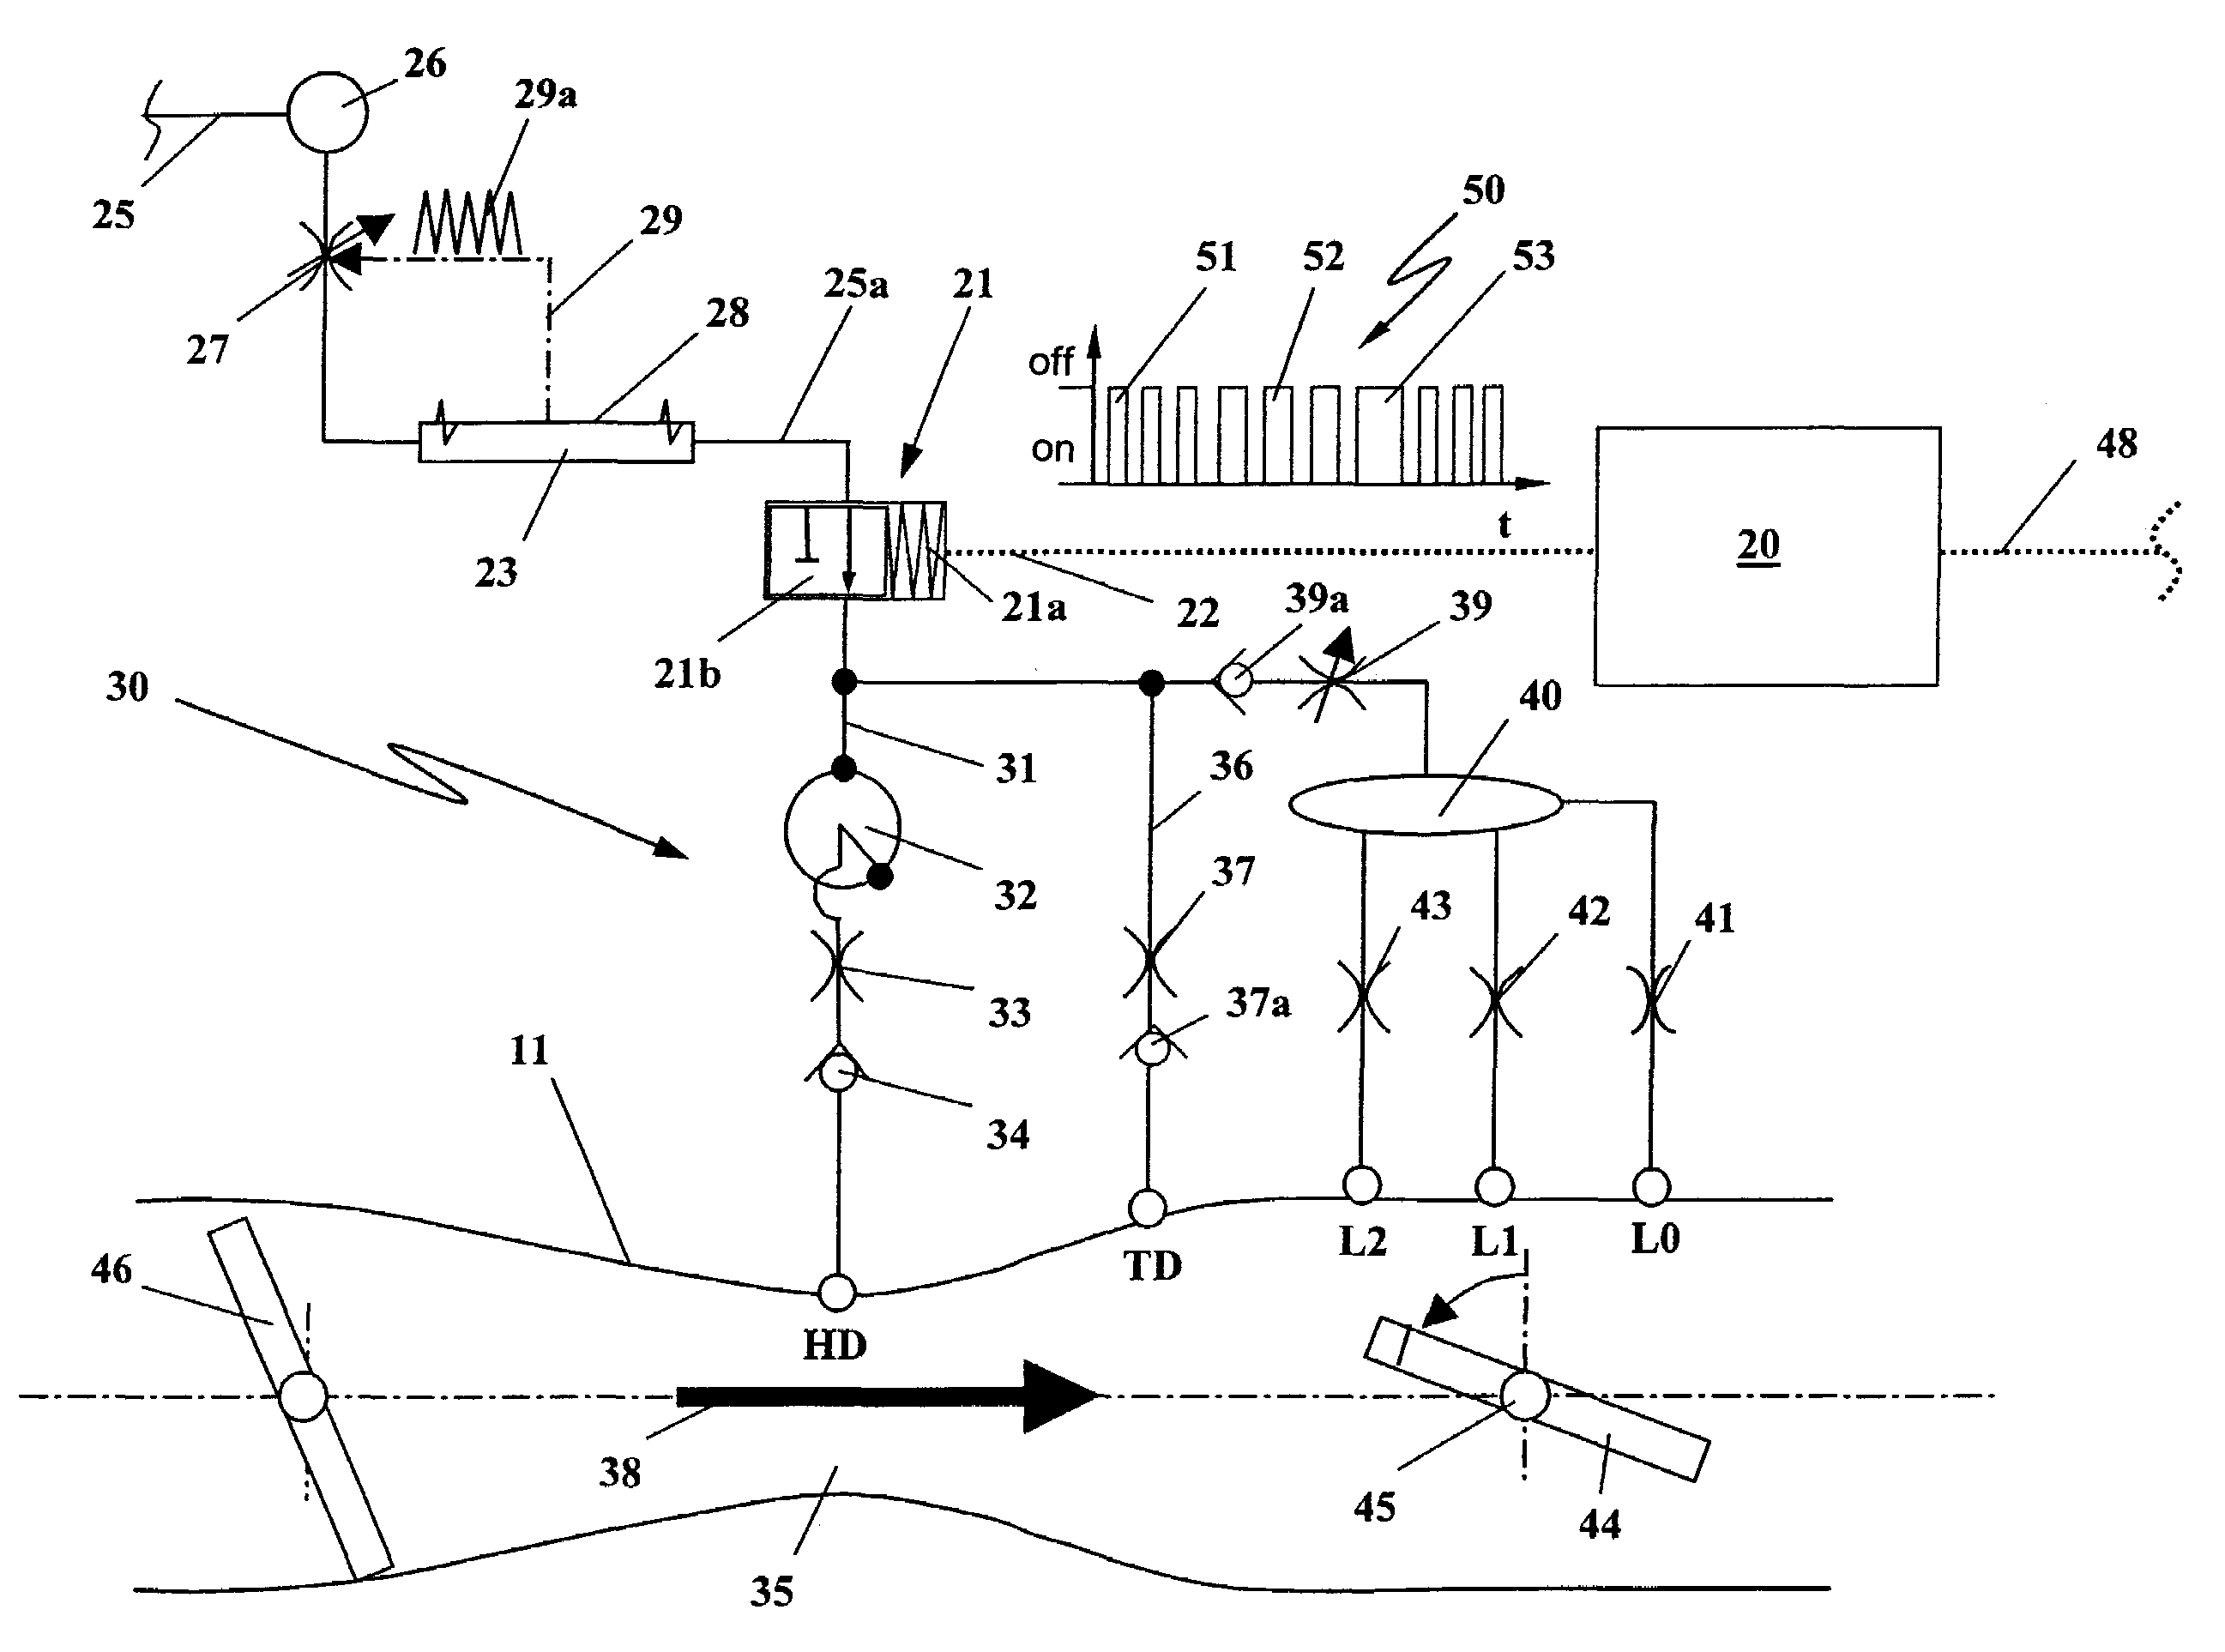 Method for controlling the composition of a fuel/air mixture for an internal combustion engine